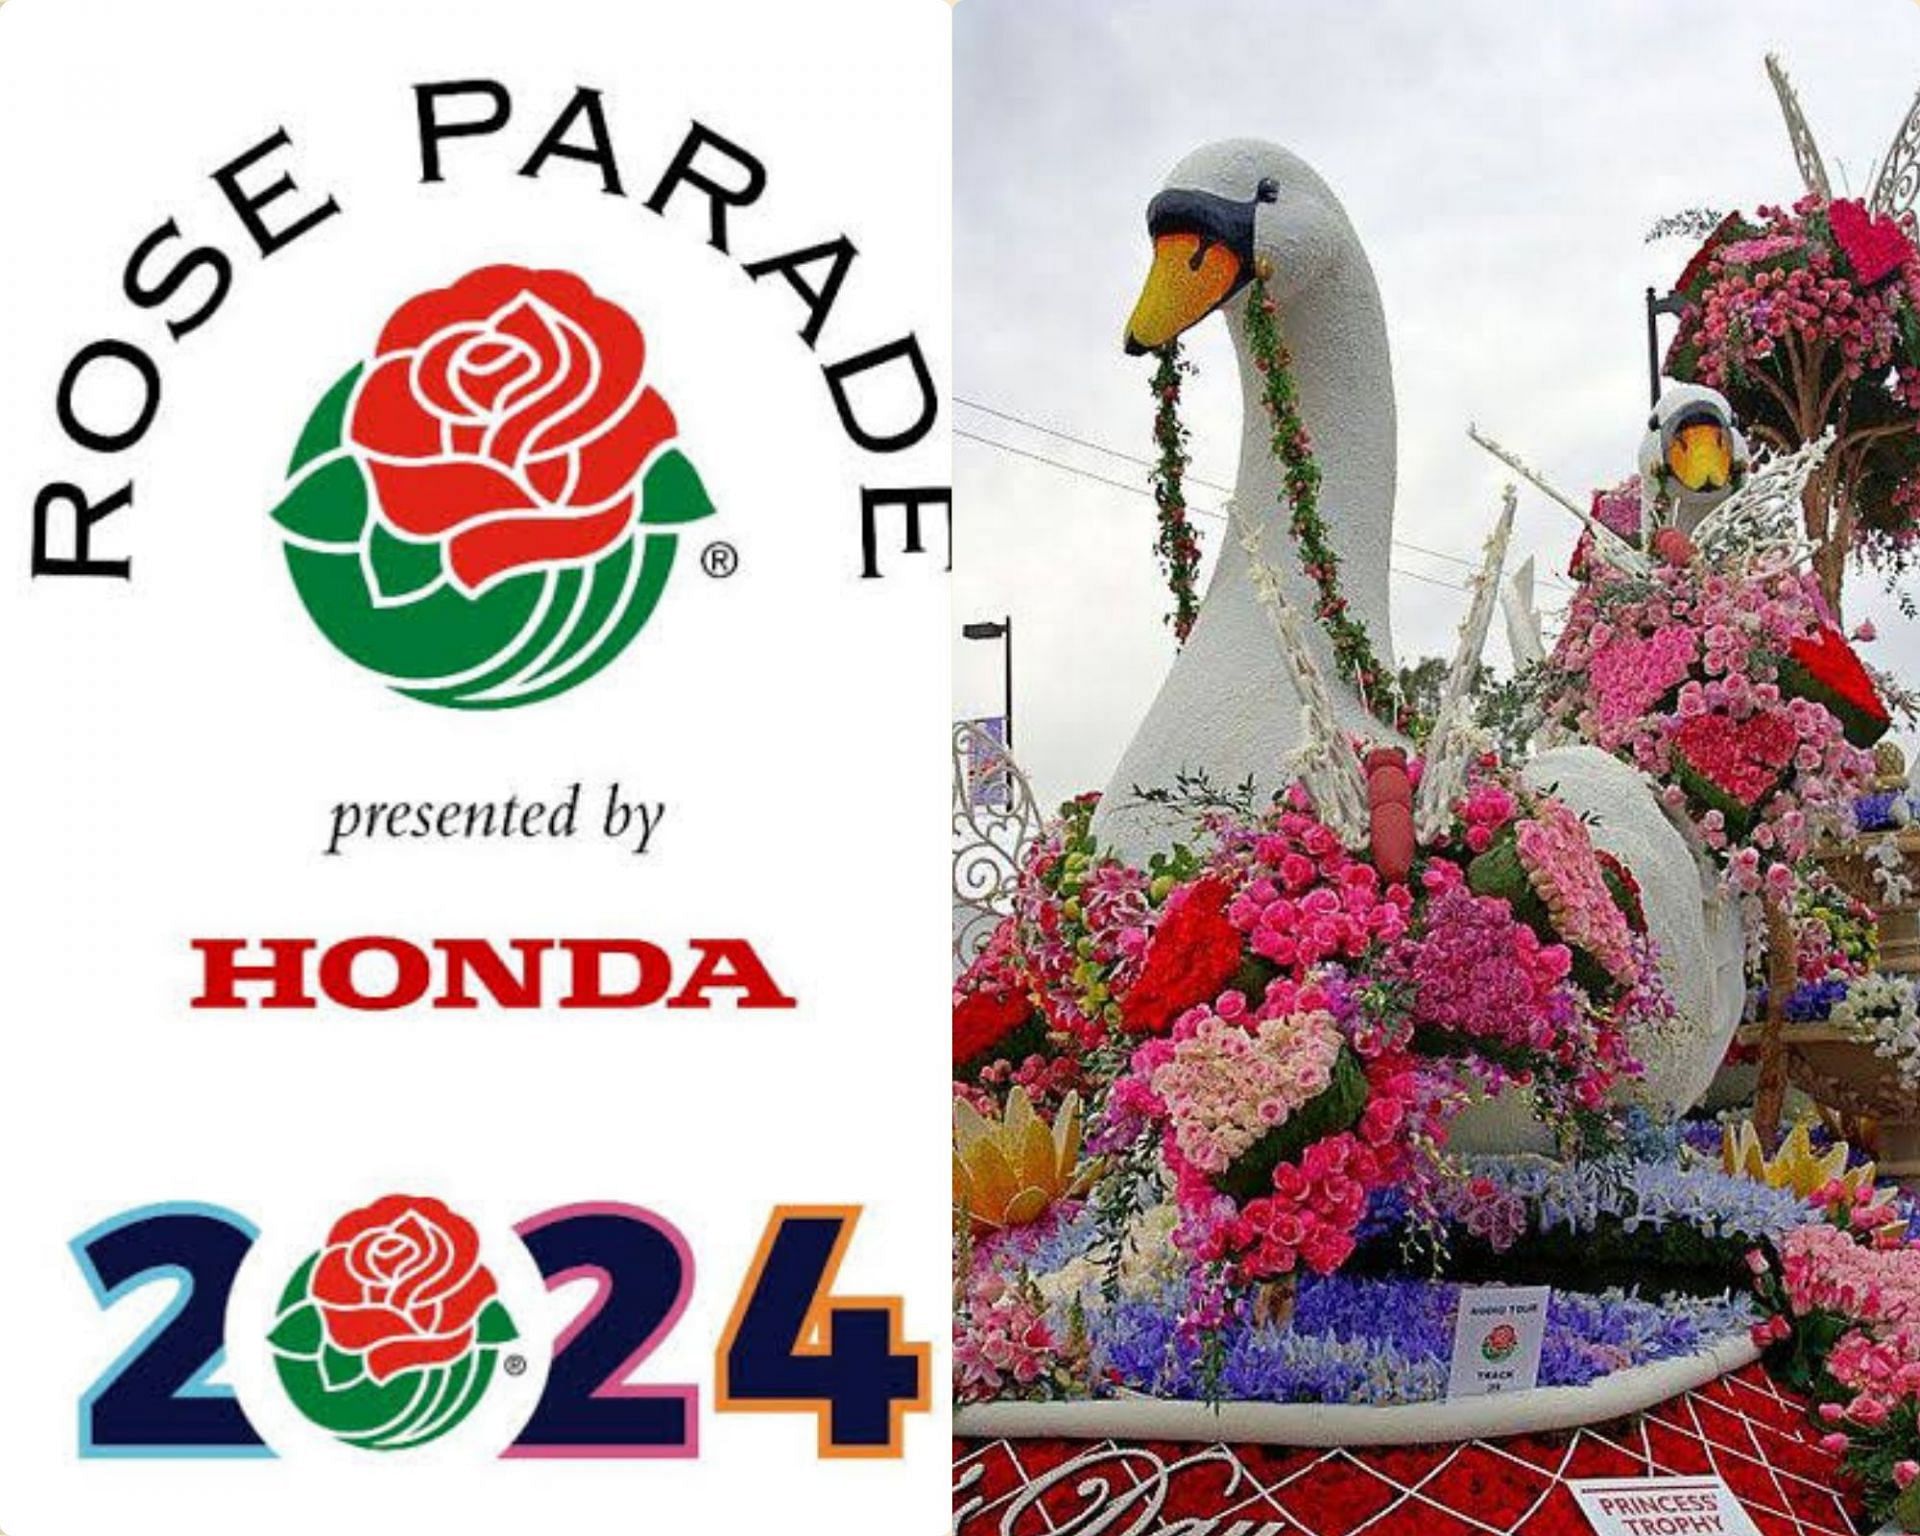 The Rose Bowl Parade is set to hold on New Year